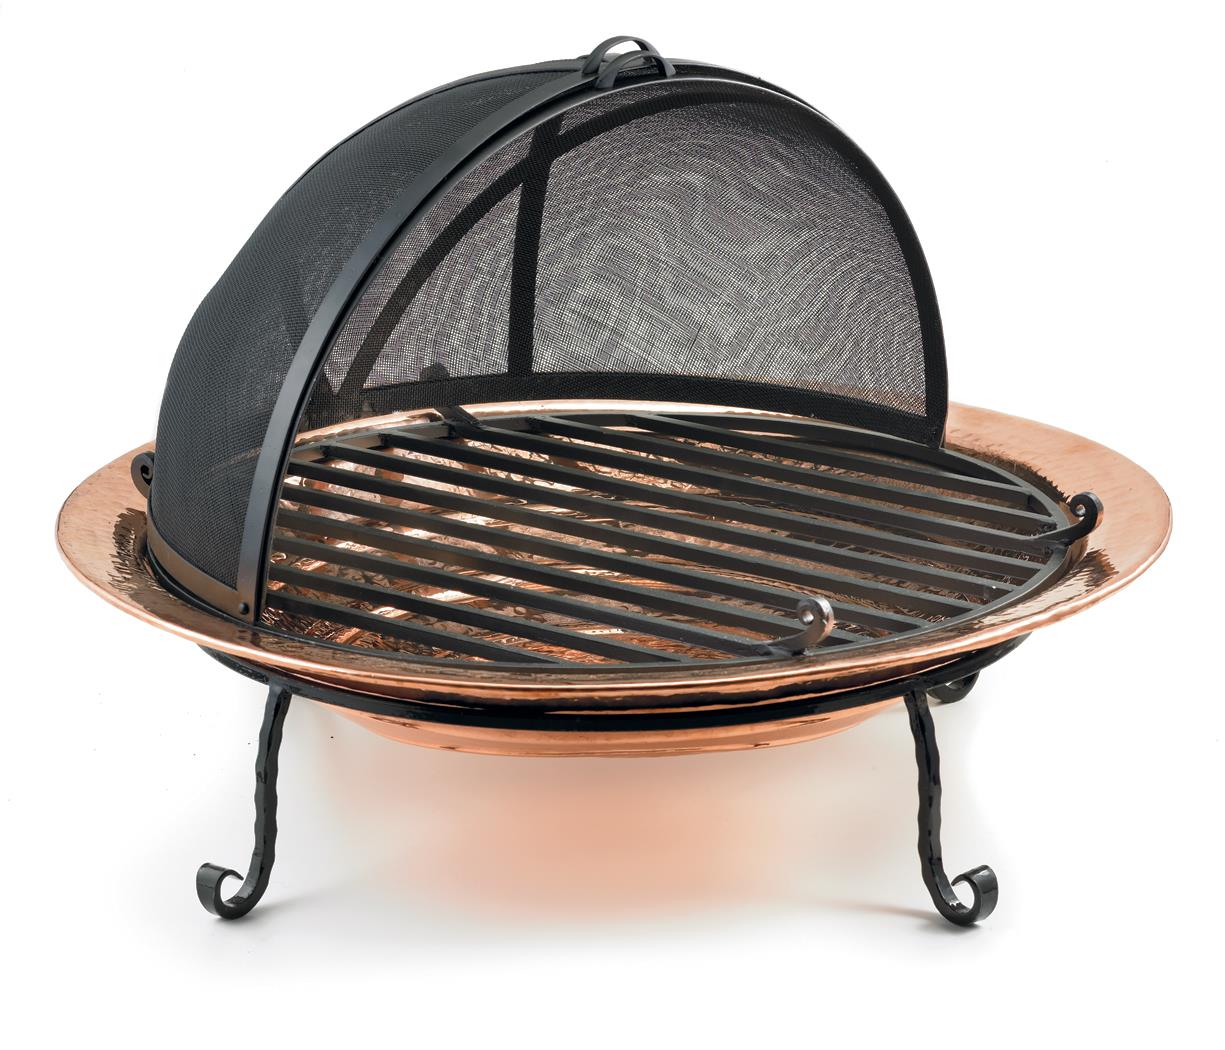 Good Directions 771 Medium Fire Pit   Polished Copper